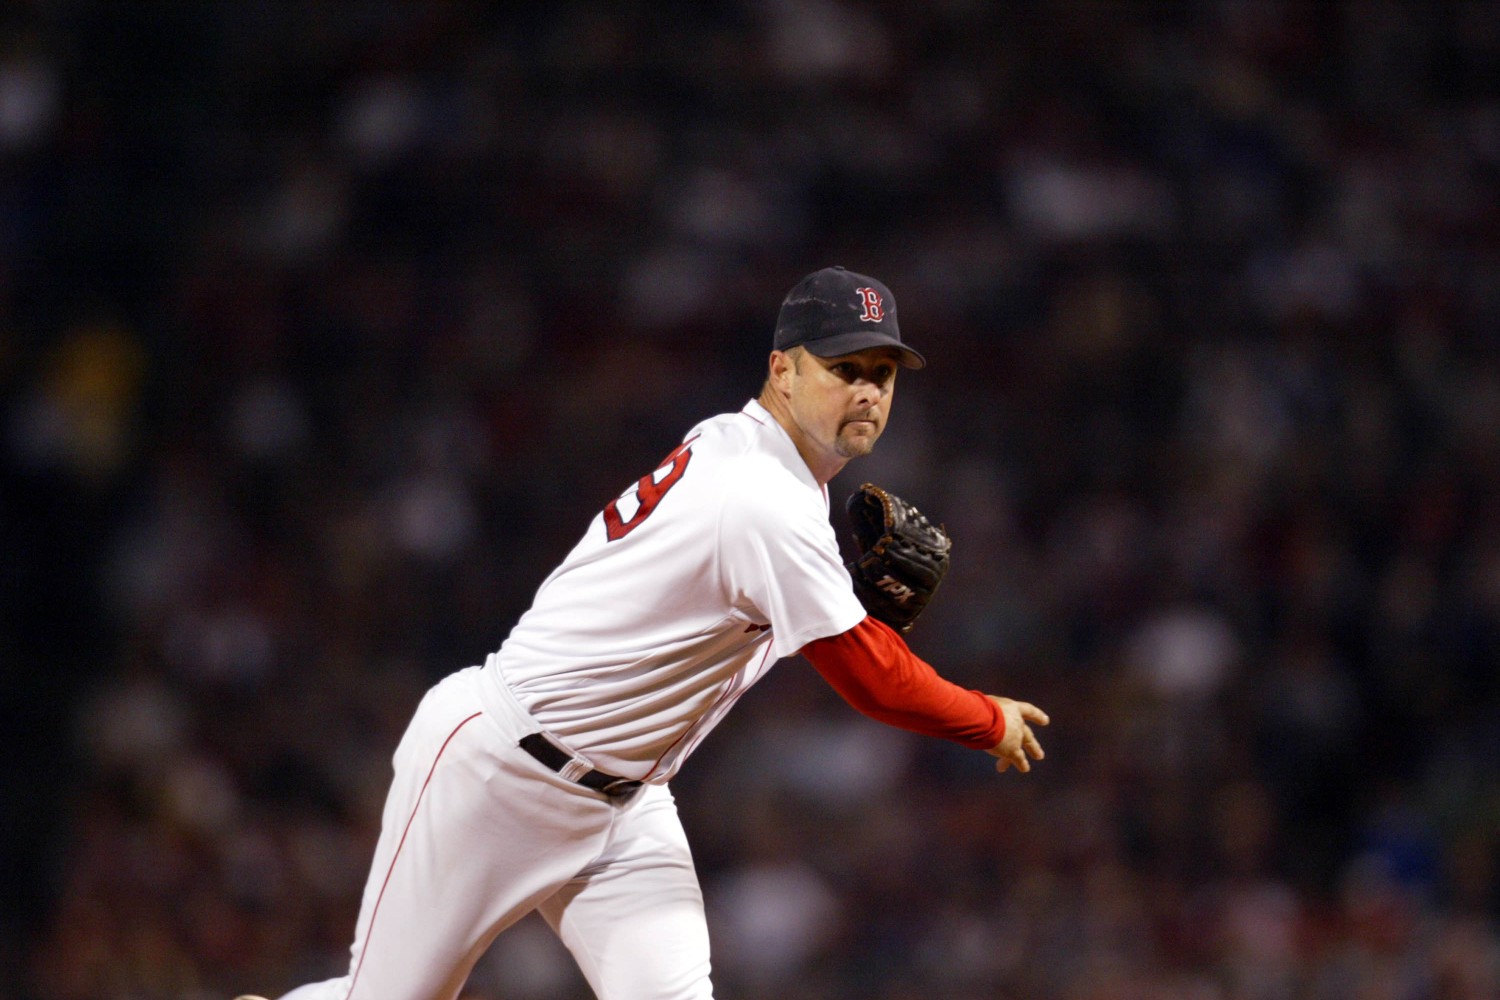 Tim Wakefield winning pitcher for ages